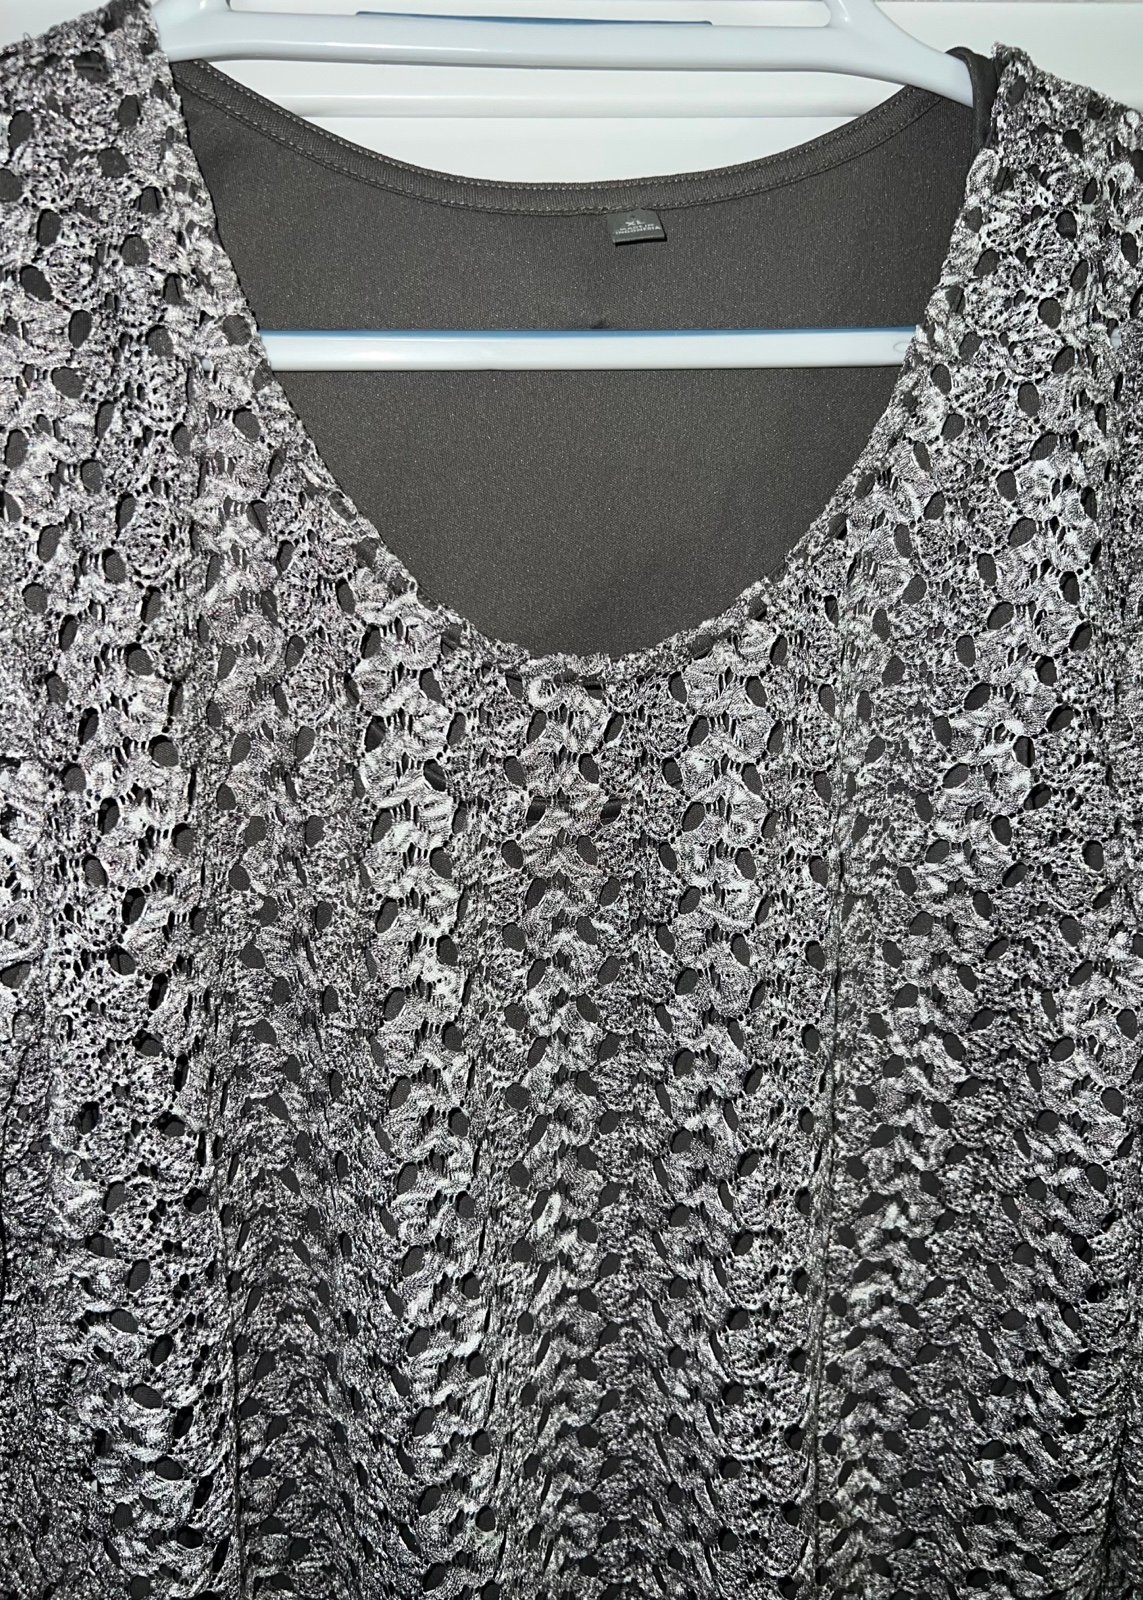 High quality JM Collection grey/white heathered crochet knit tunic and solid tank set Size XL kHa0uNqwU best sale